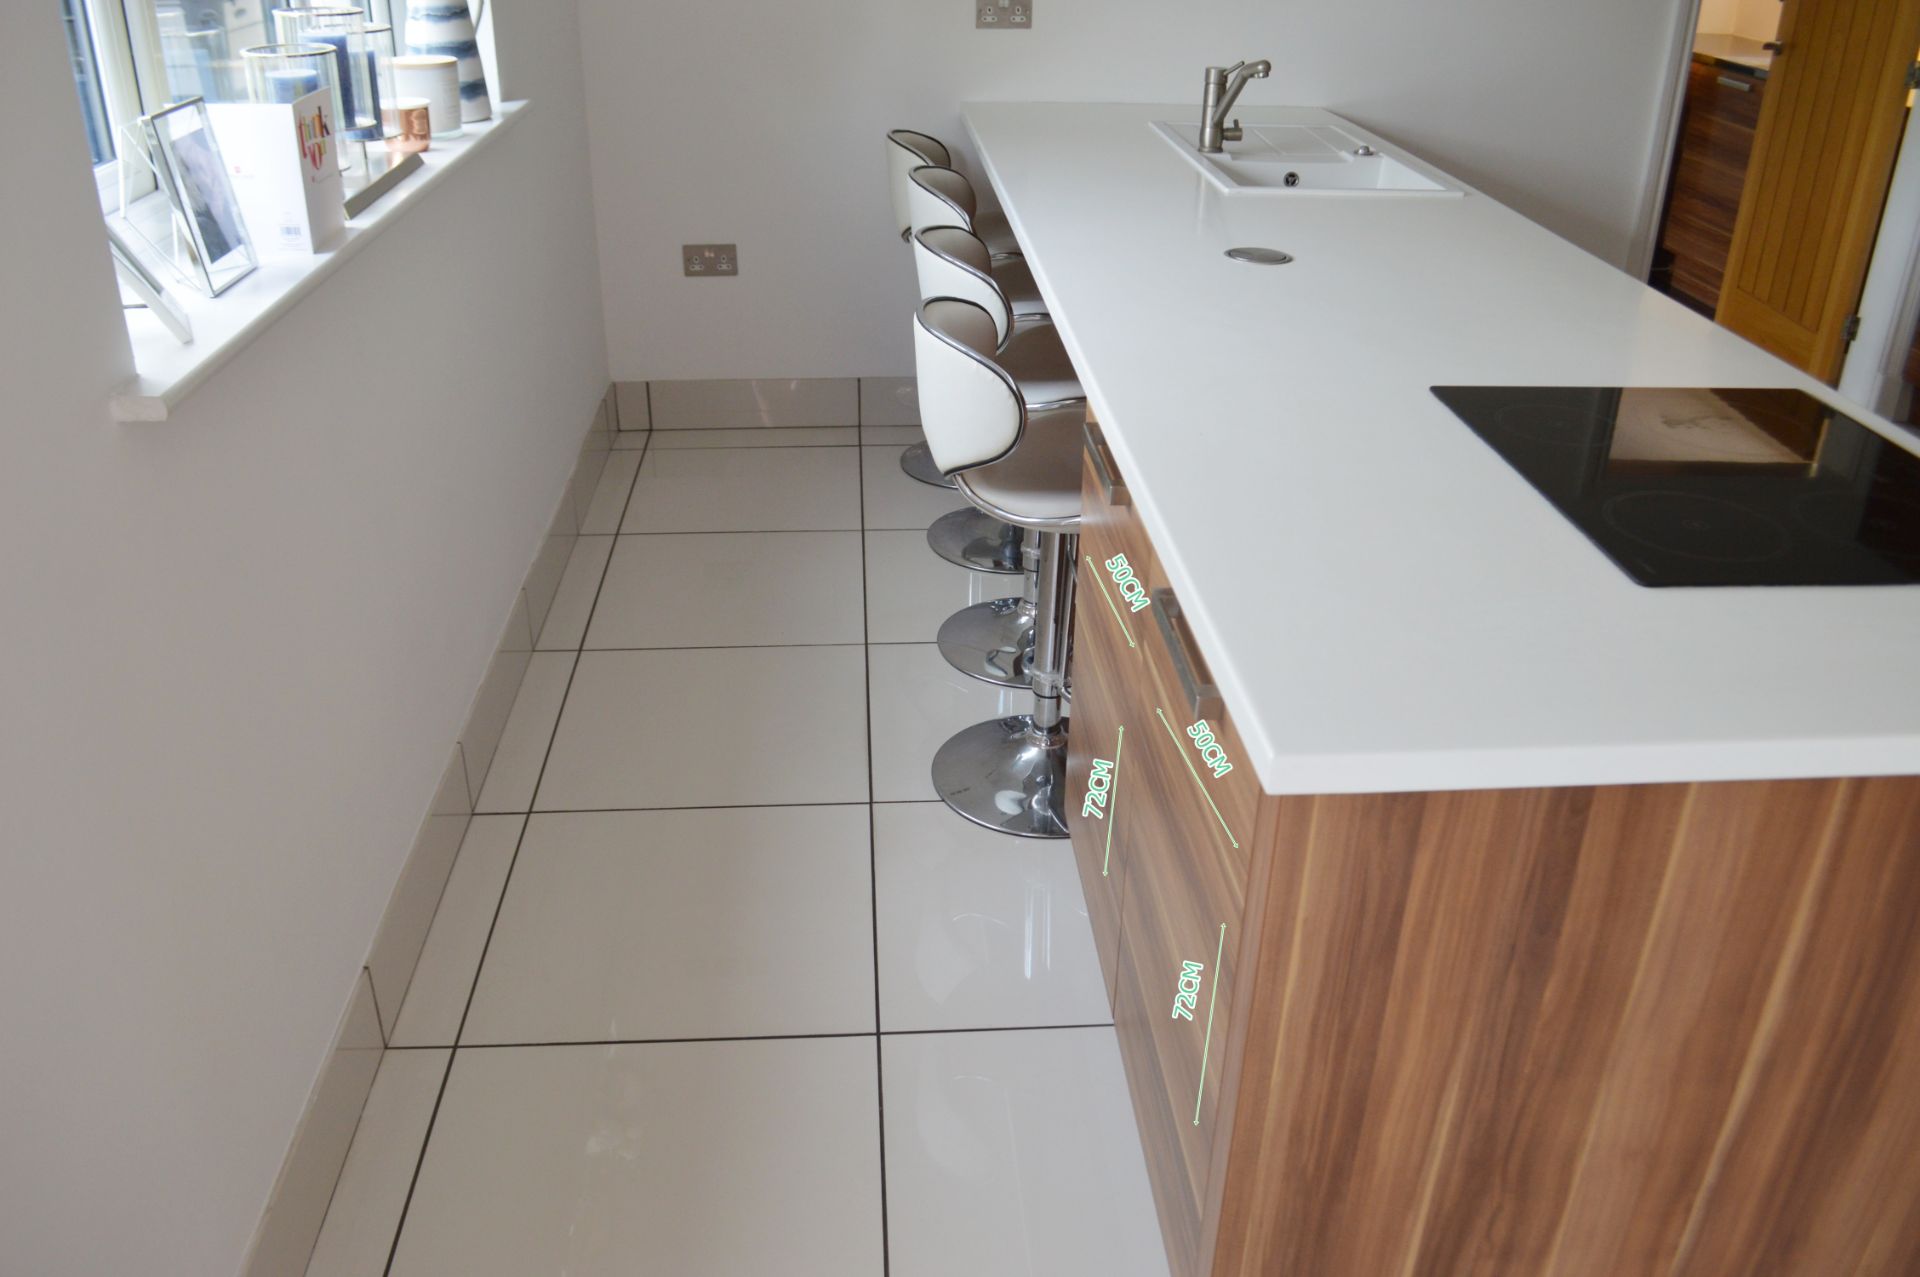 1 x Contemporary Bespoke Fitted Kitchen With Neff Branded Appliances - Collection Date: 1st November - Image 30 of 52